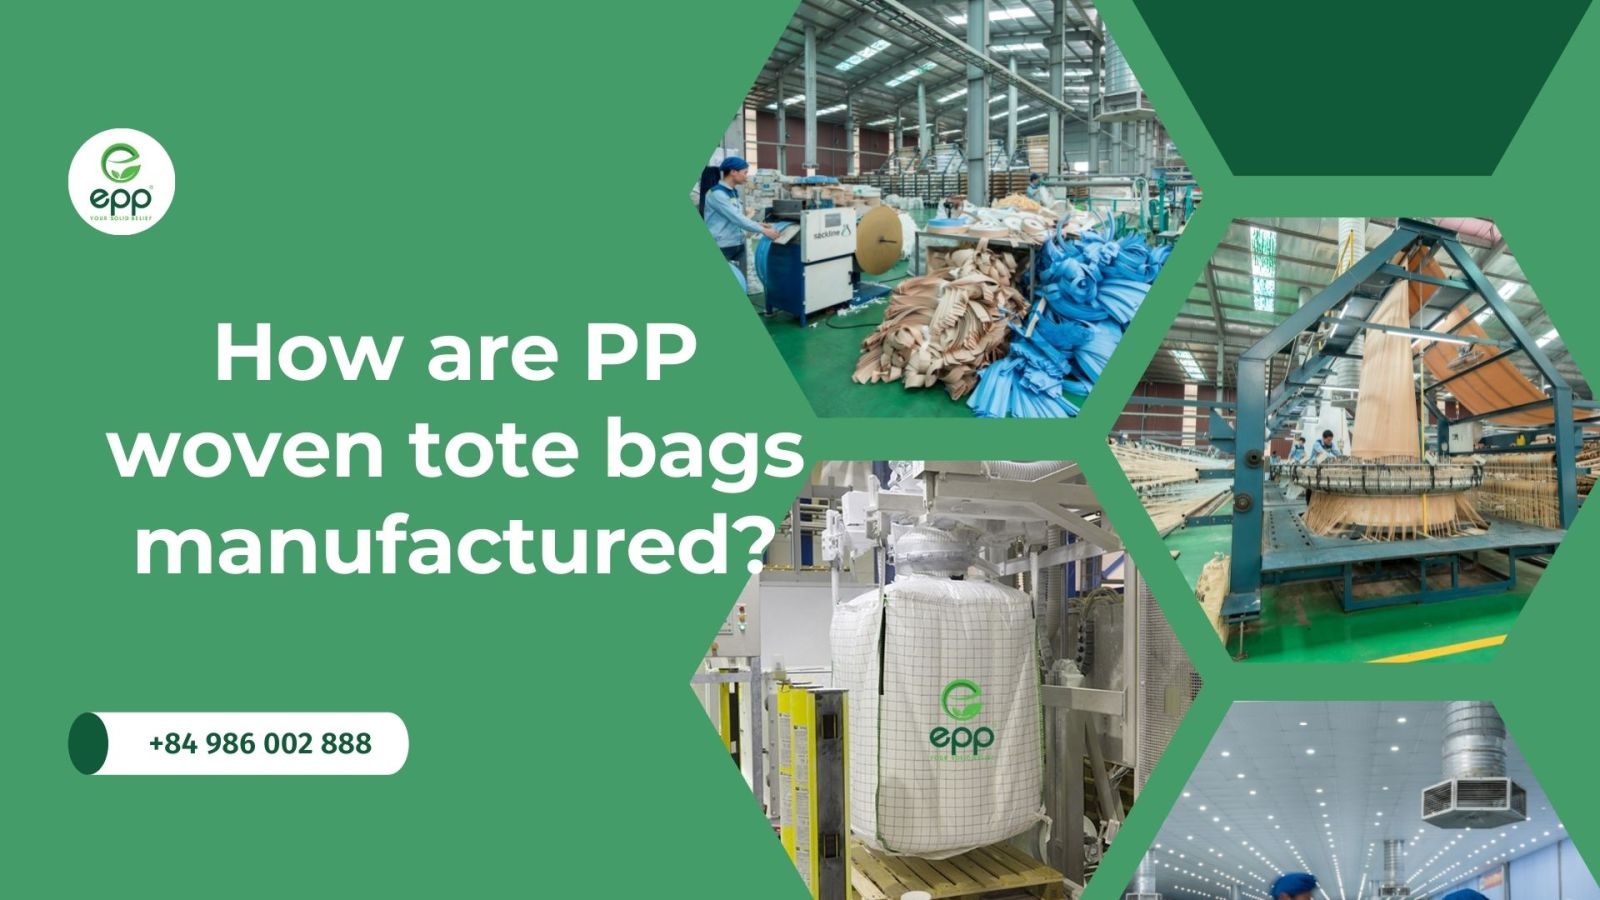 How-are-PP-woven-tote-bags-manufactured.jpg